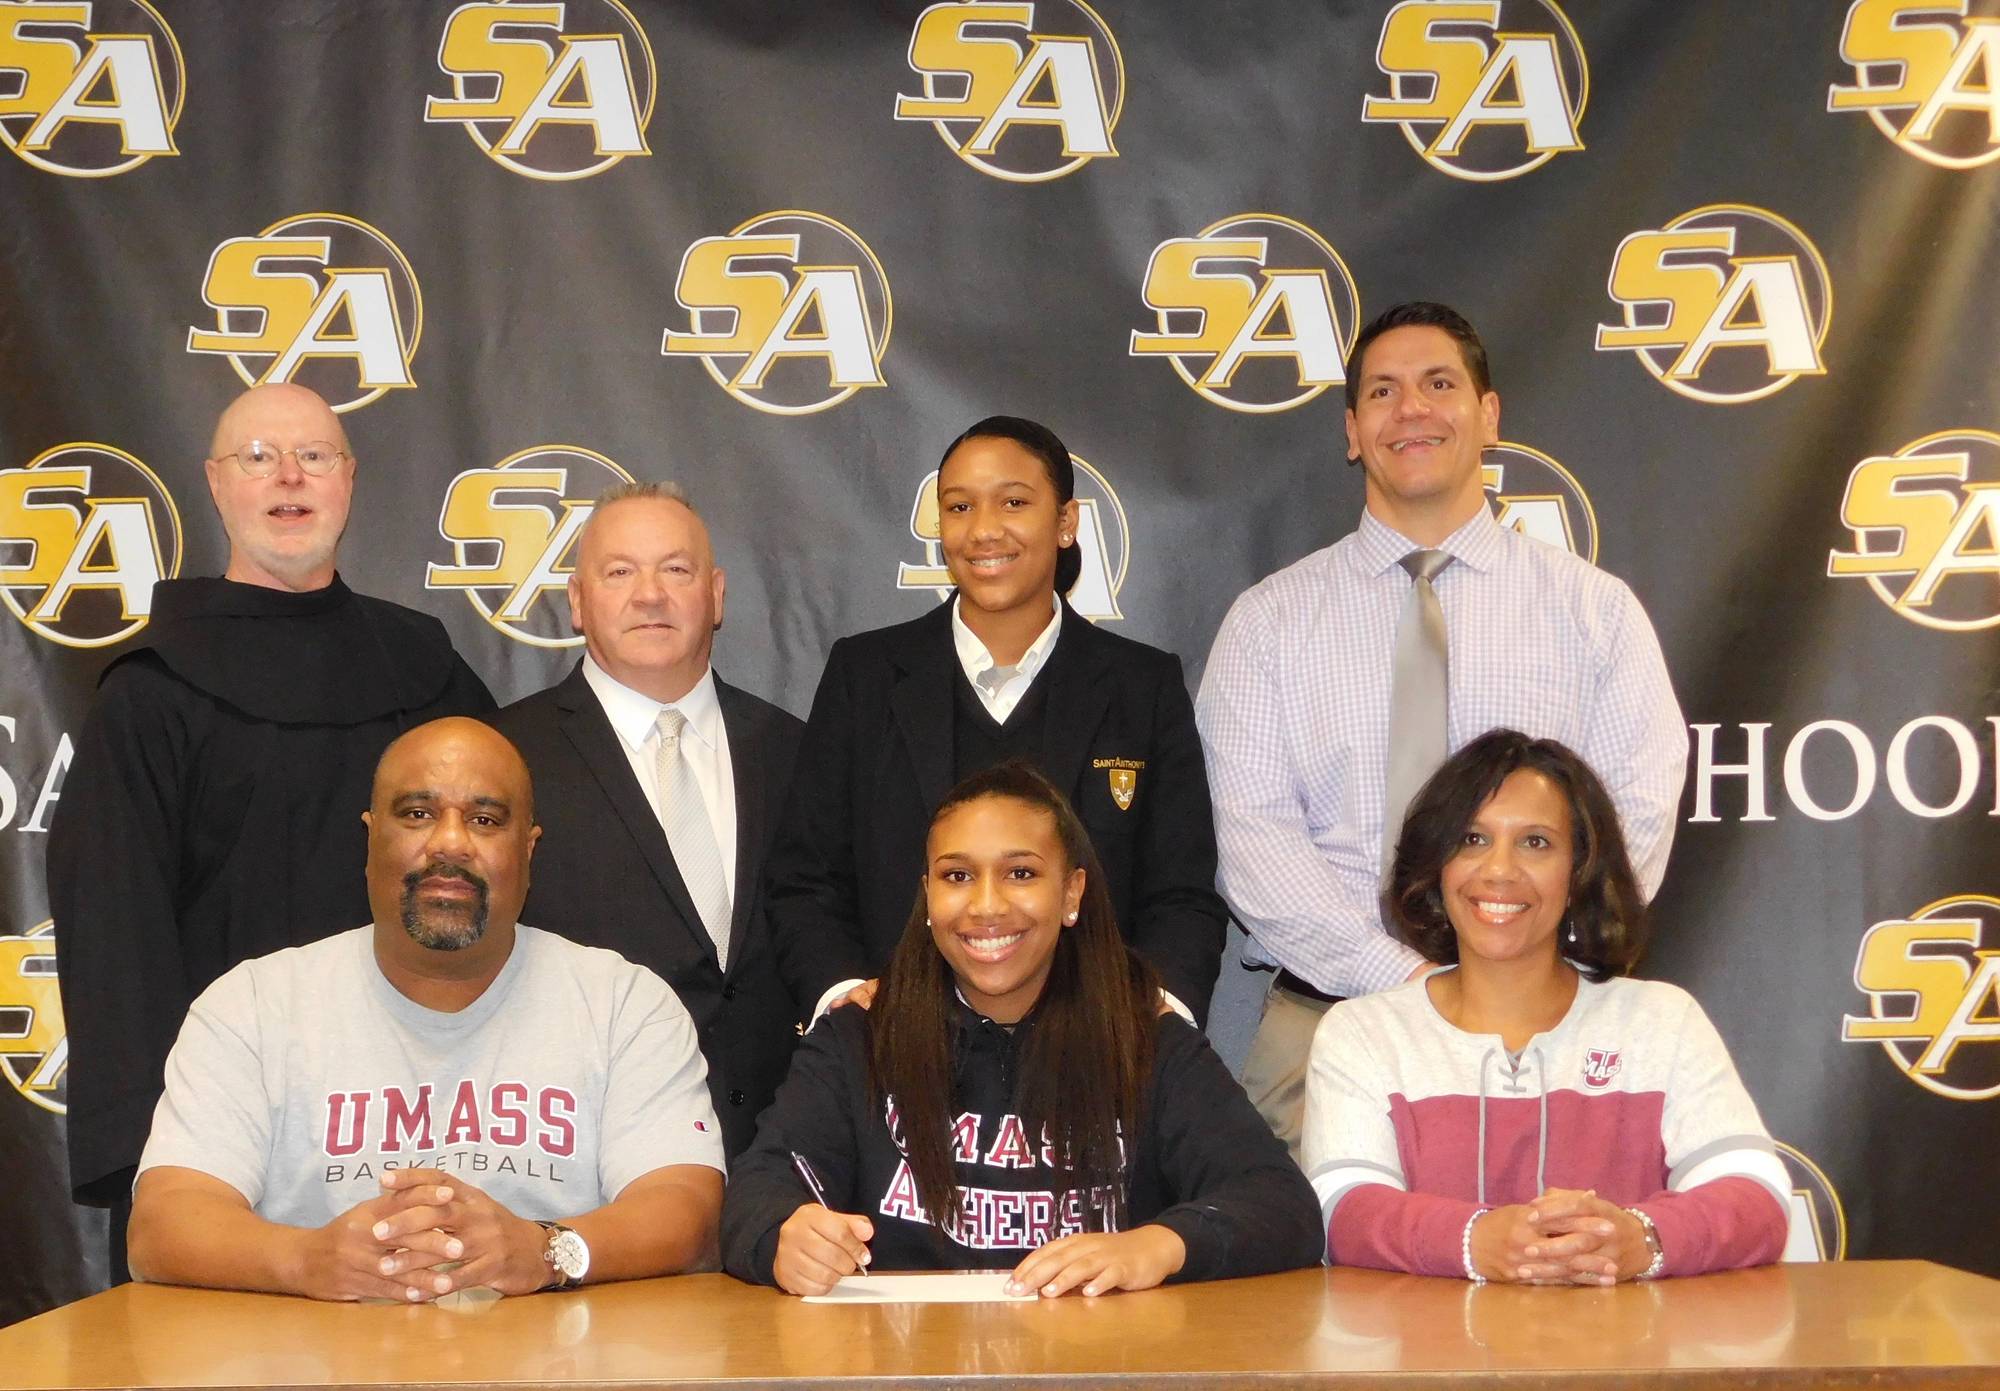 Congratulations to Sydney Taylor for committing to the University of Massachusetts for Basketball